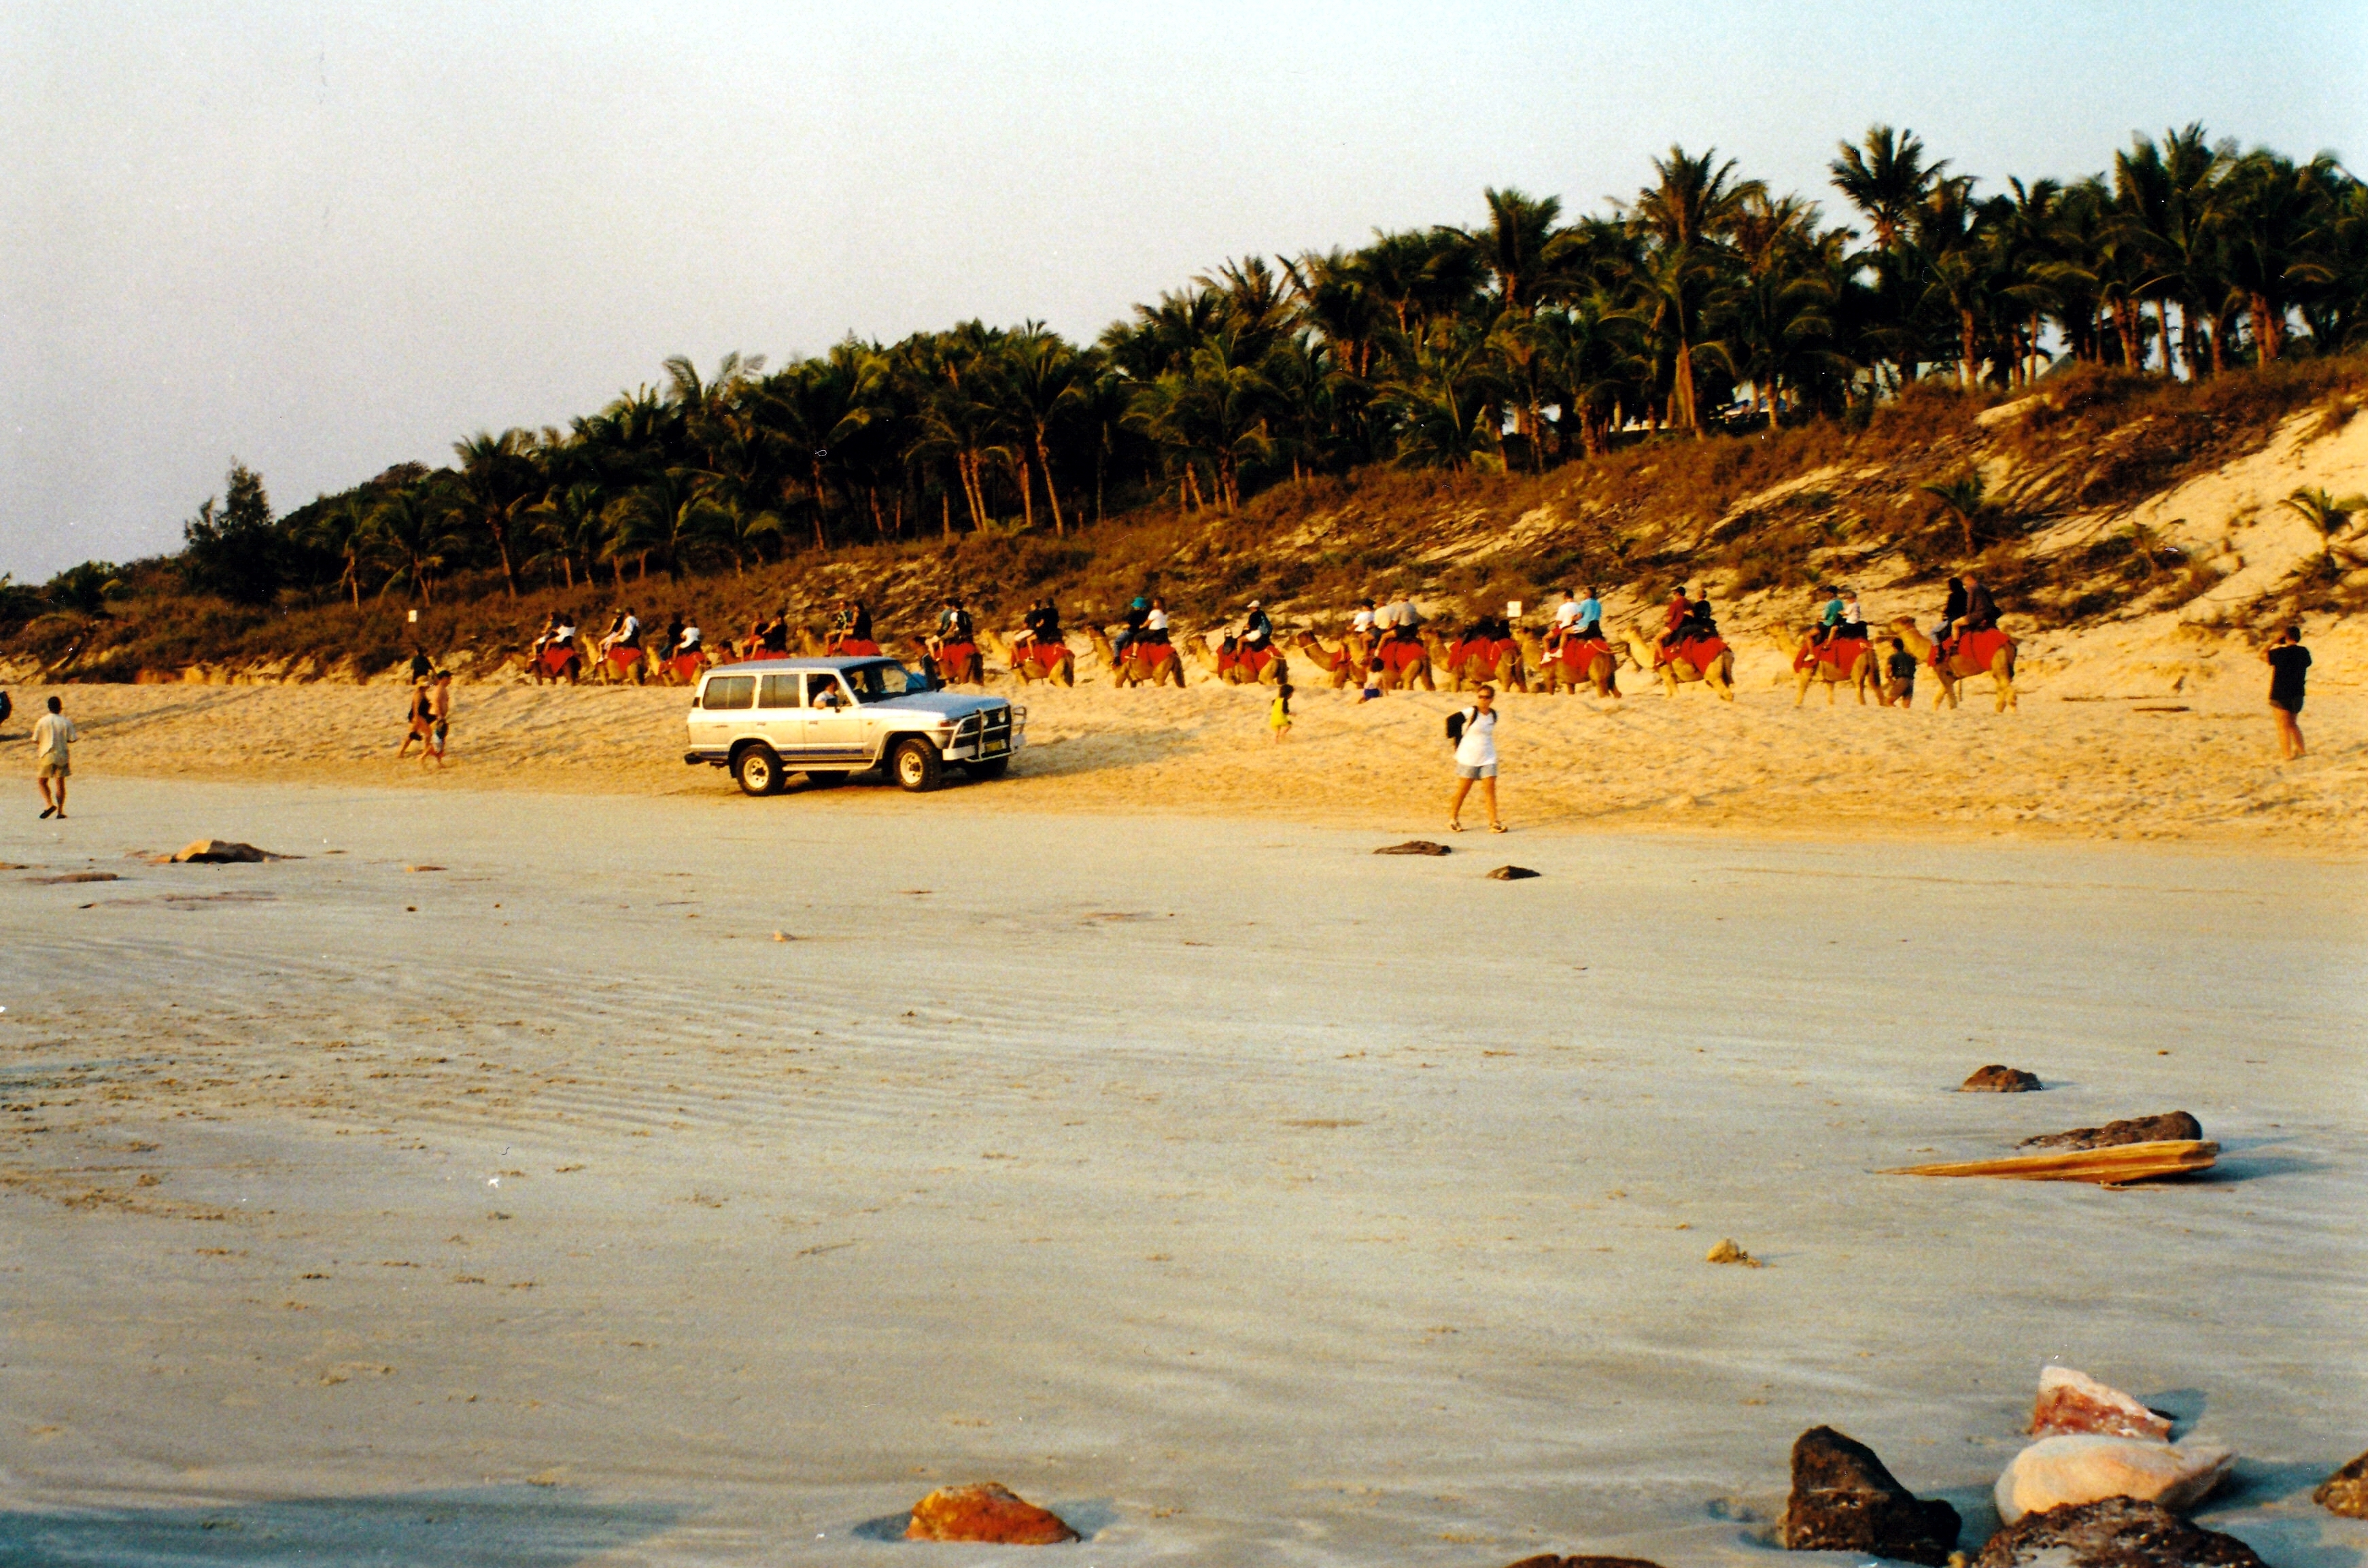 08-27-2000 camels cable beach.jpg